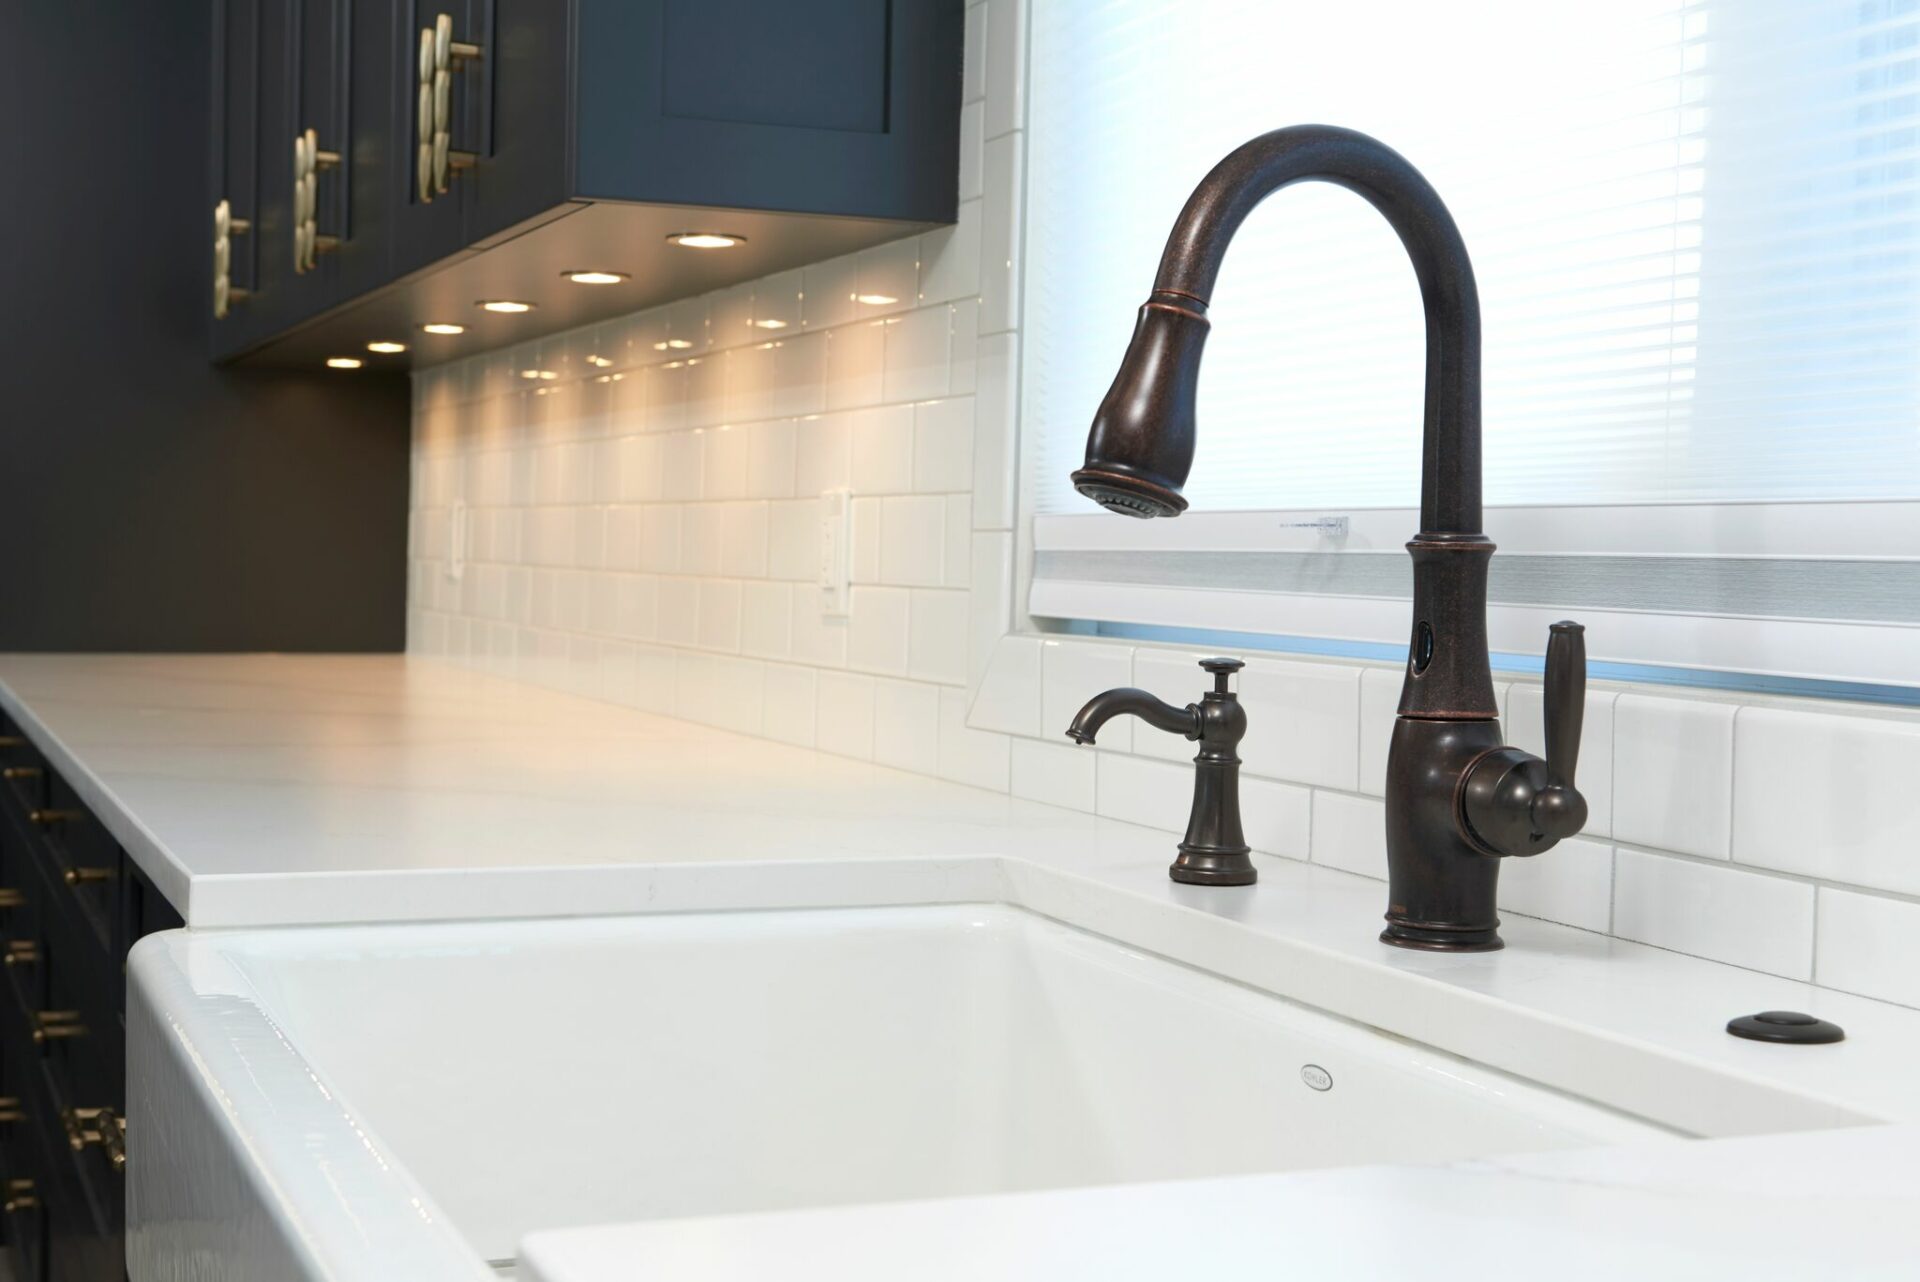 A white sink and black faucet in a kitchen.